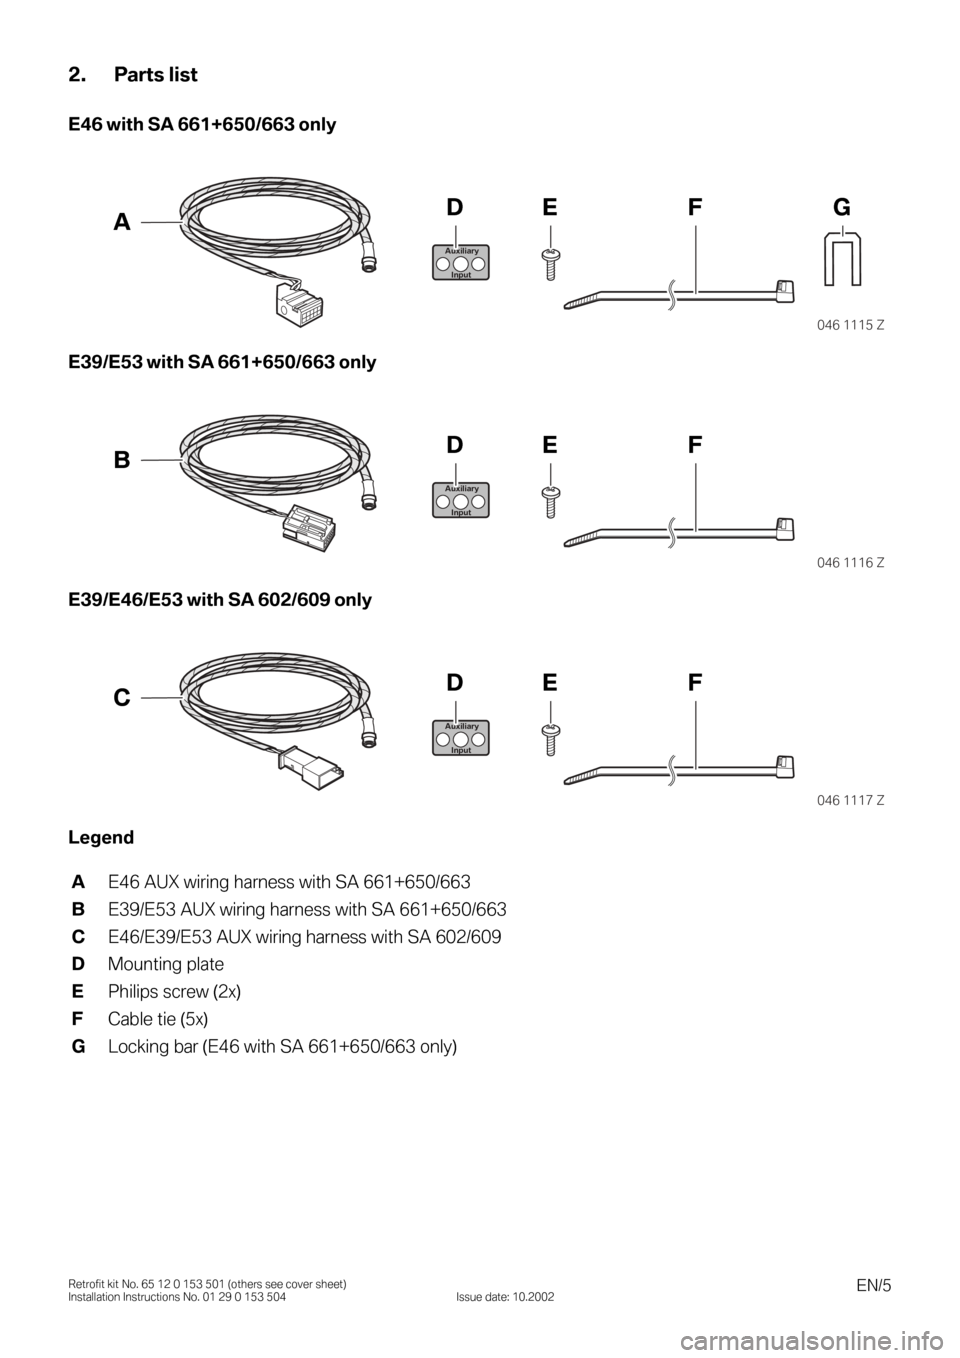 BMW X5 2003 E53 Auxilliary Connector Installation Instruction Manual EN/5Retrofit kit No. 65 12 0 153 501 (others see cover sheet)
Installation Instructions No. 01 29 0 153 504 Issue date: 10.2002
2. Parts list
E46 with SA 661+650/663 only
0
E39/E53 with SA 661+650/663